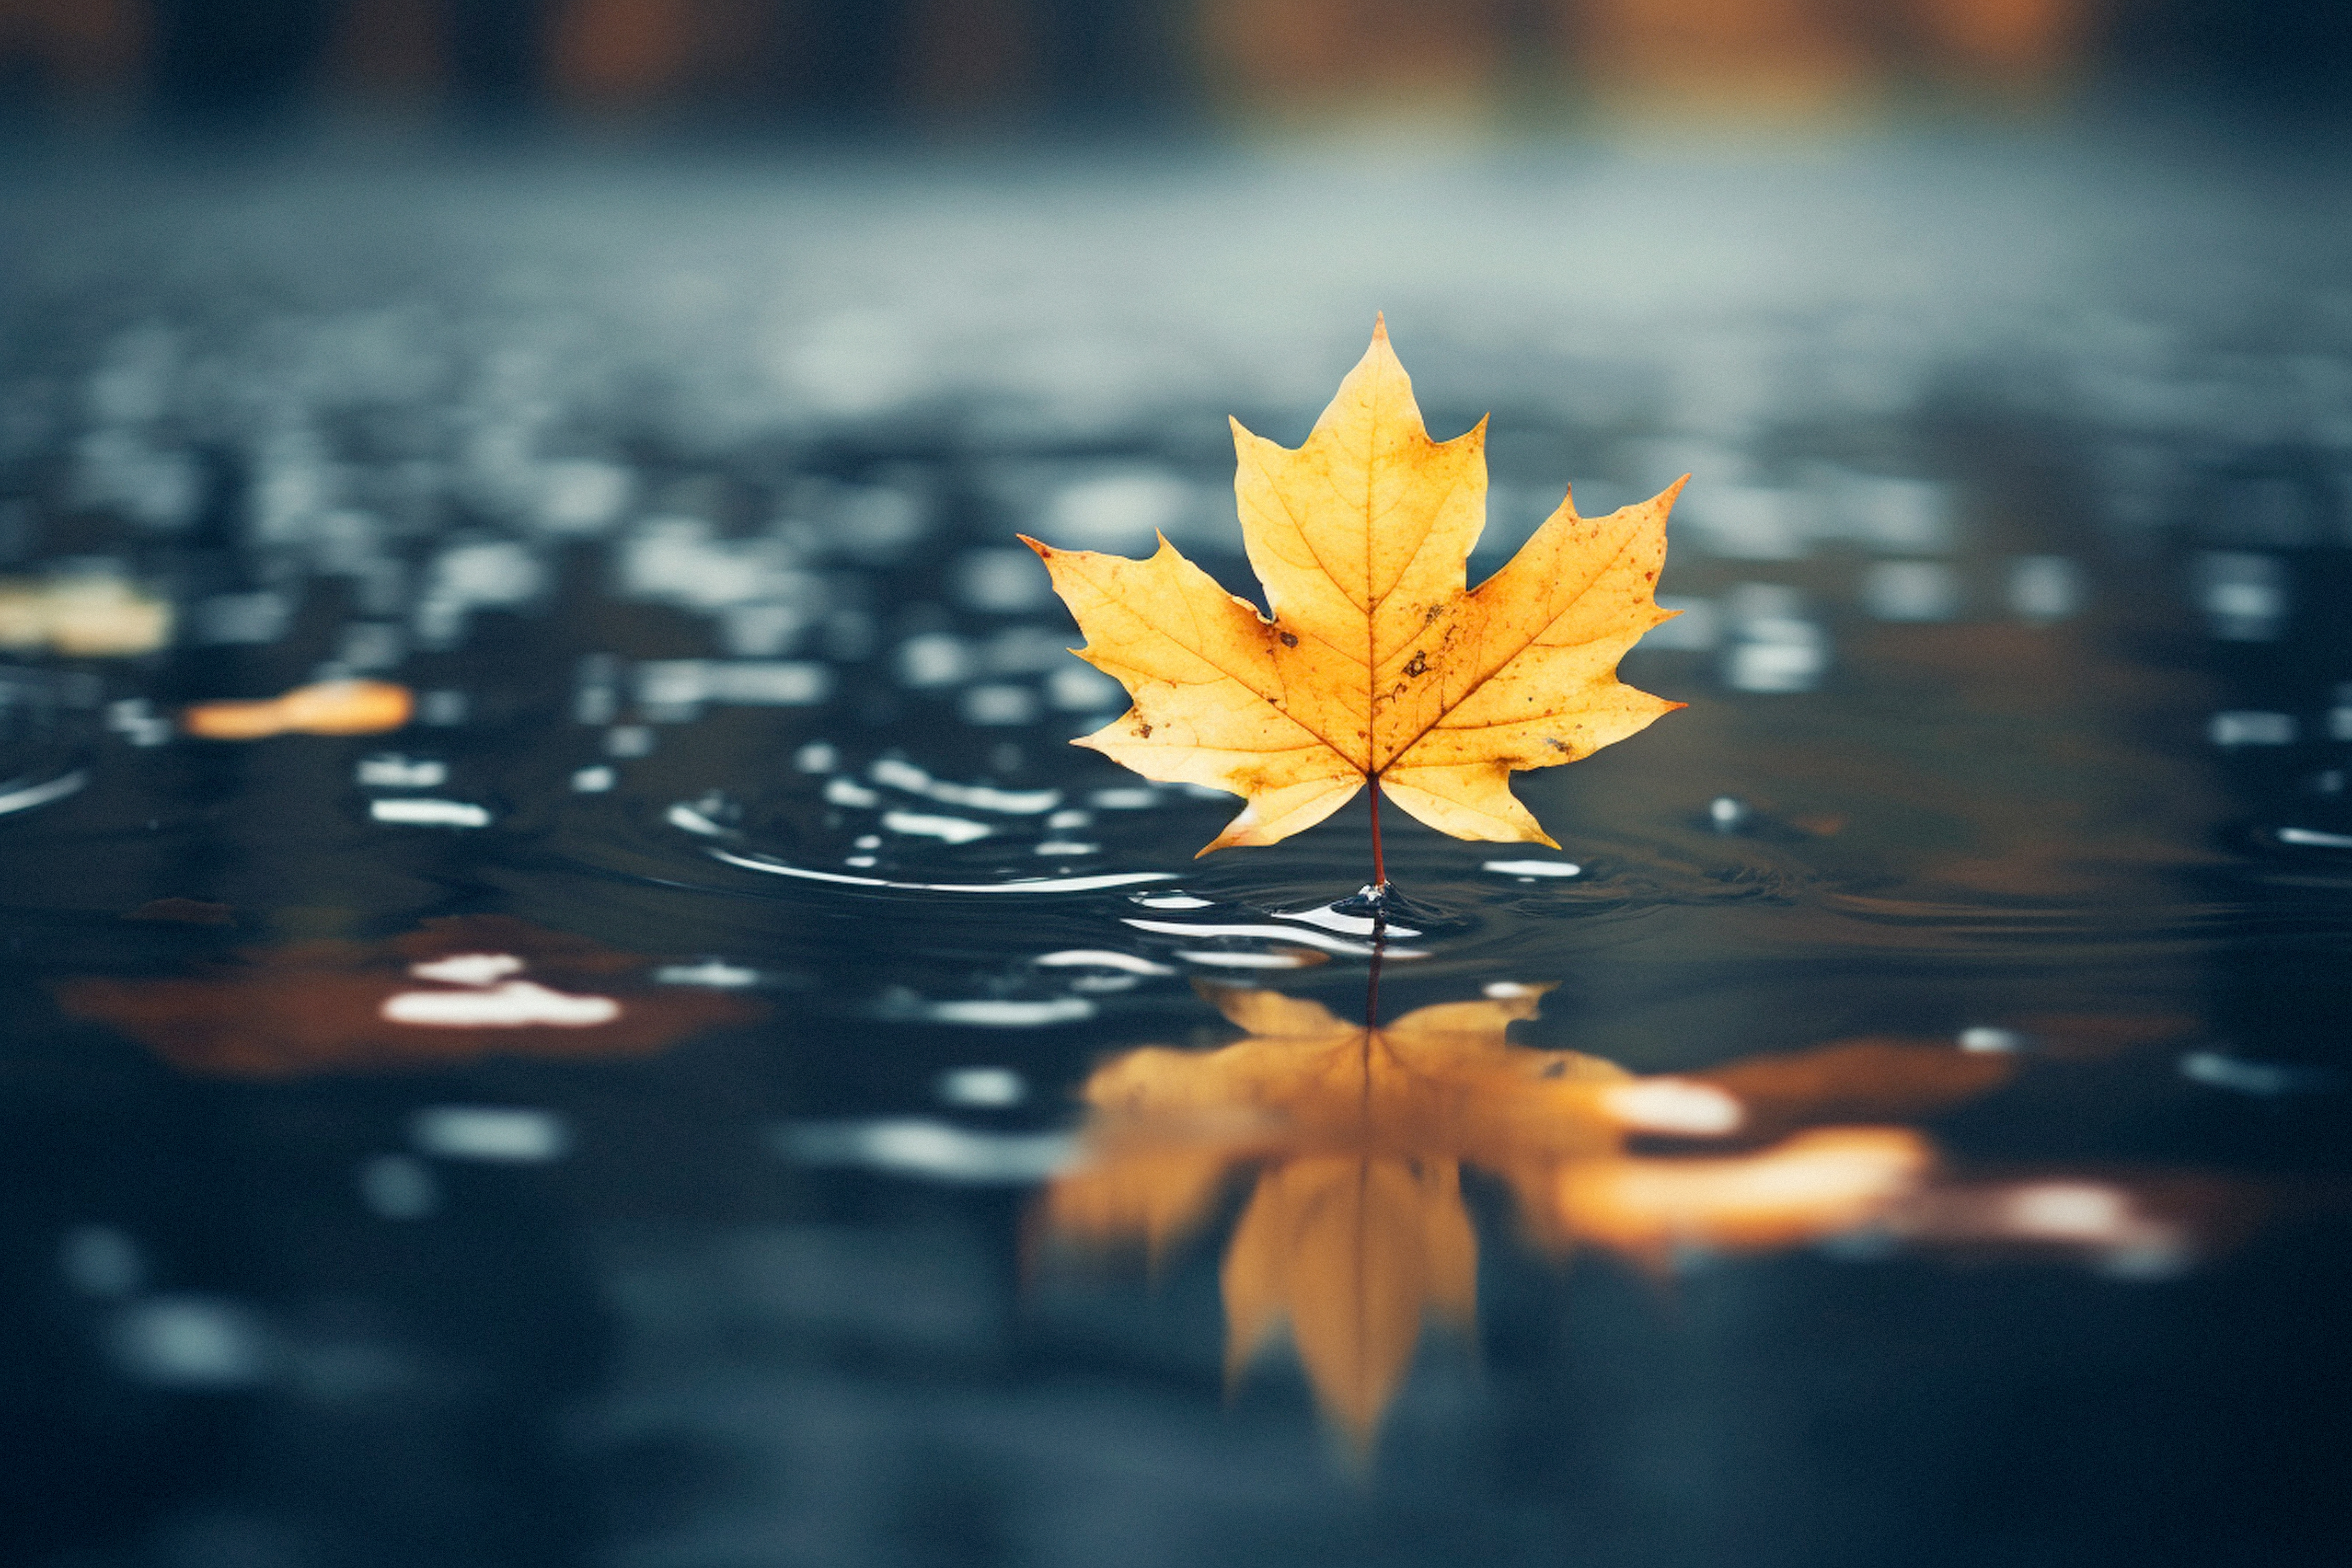 An autumn wedge leaf floats on the water